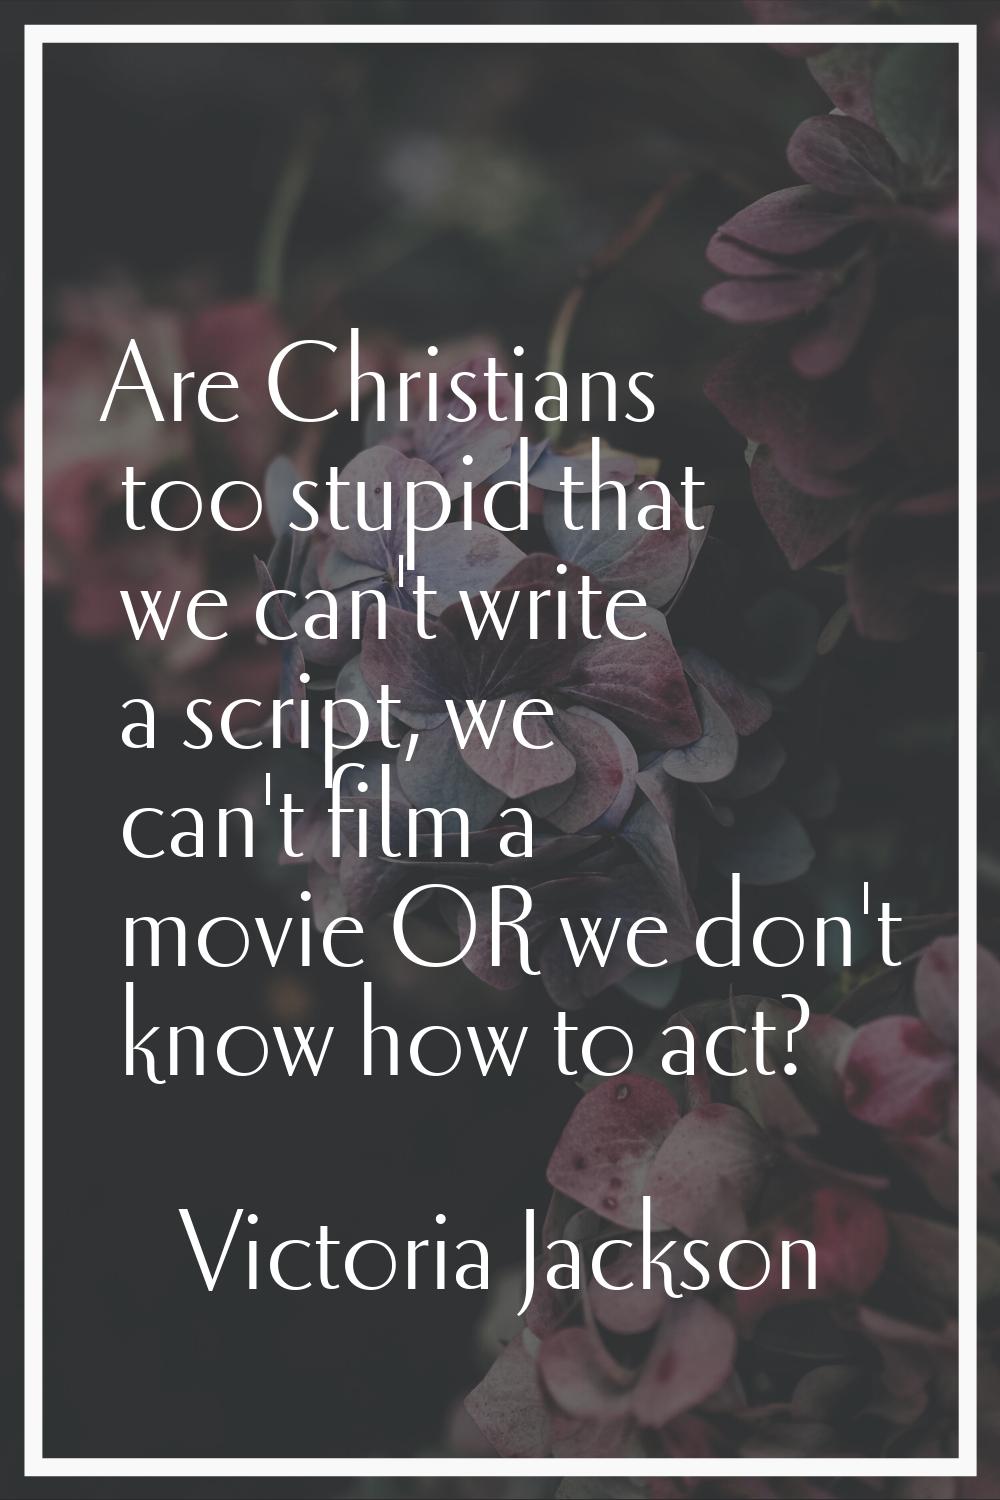 Are Christians too stupid that we can't write a script, we can't film a movie OR we don't know how 